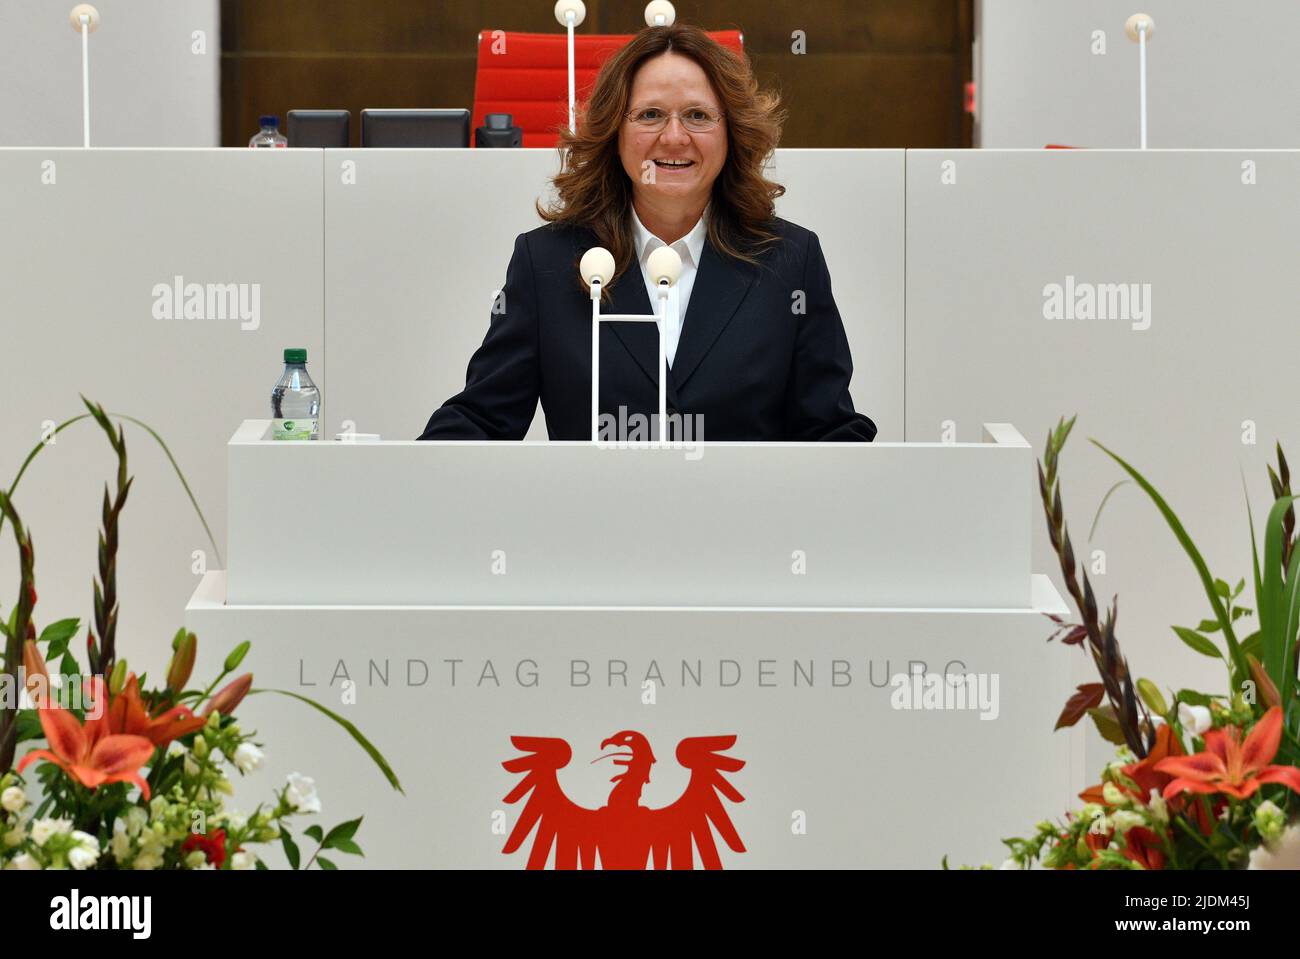 Potsdam, Germany. 22nd June, 2022. Ines Härtel, Judge of the Federal Constitutional Court, speaks at the commemorative event marking the 30th anniversary of the Brandenburg Constitution in the state parliament. Credit: Bernd Settnik/dpa/Alamy Live News Stock Photo